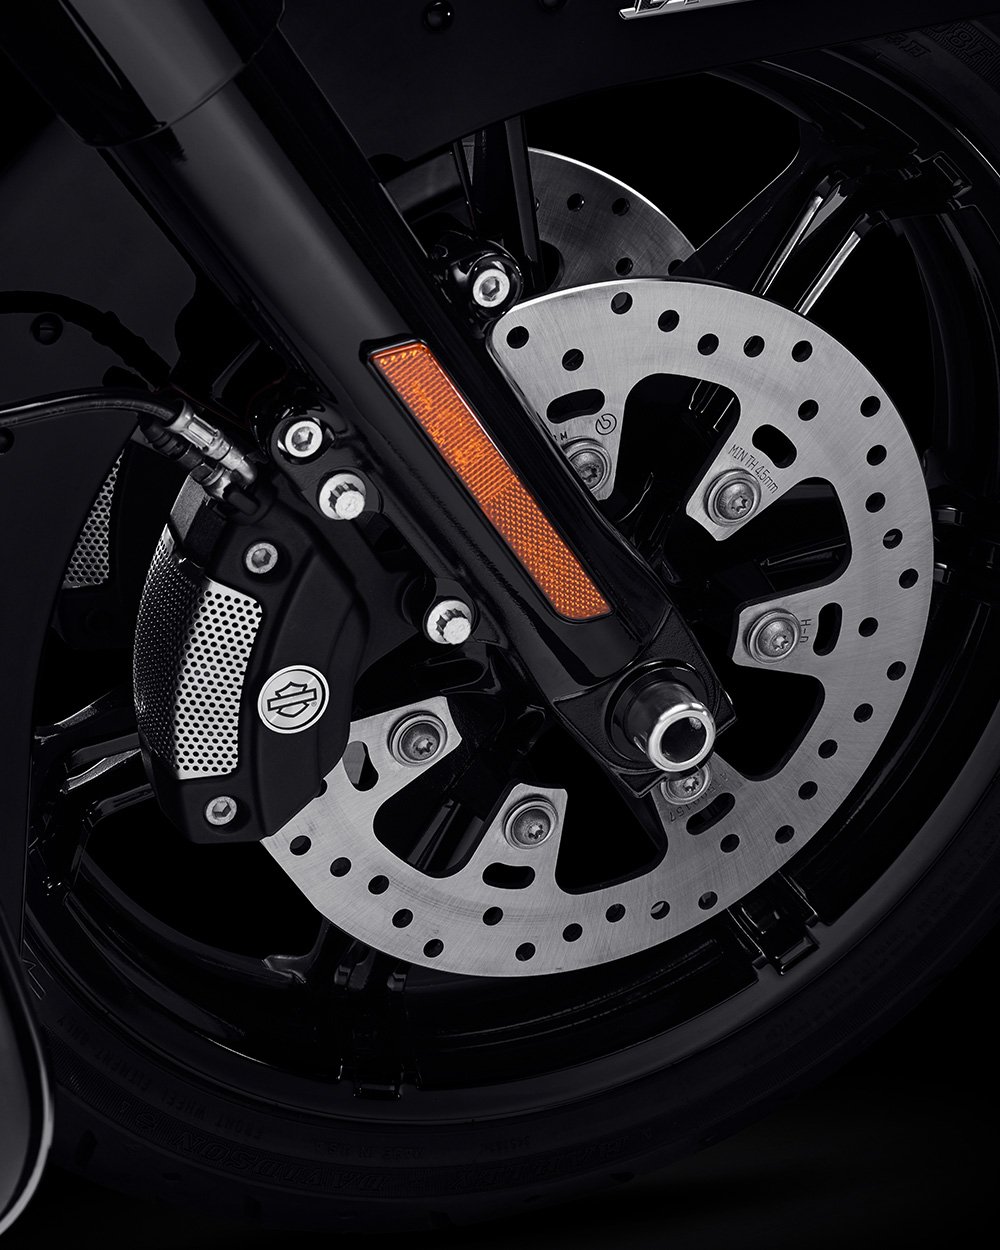 Reflex Linked Brembo Brakes with Optional ABS on a 2022 Road Glide motorcycle